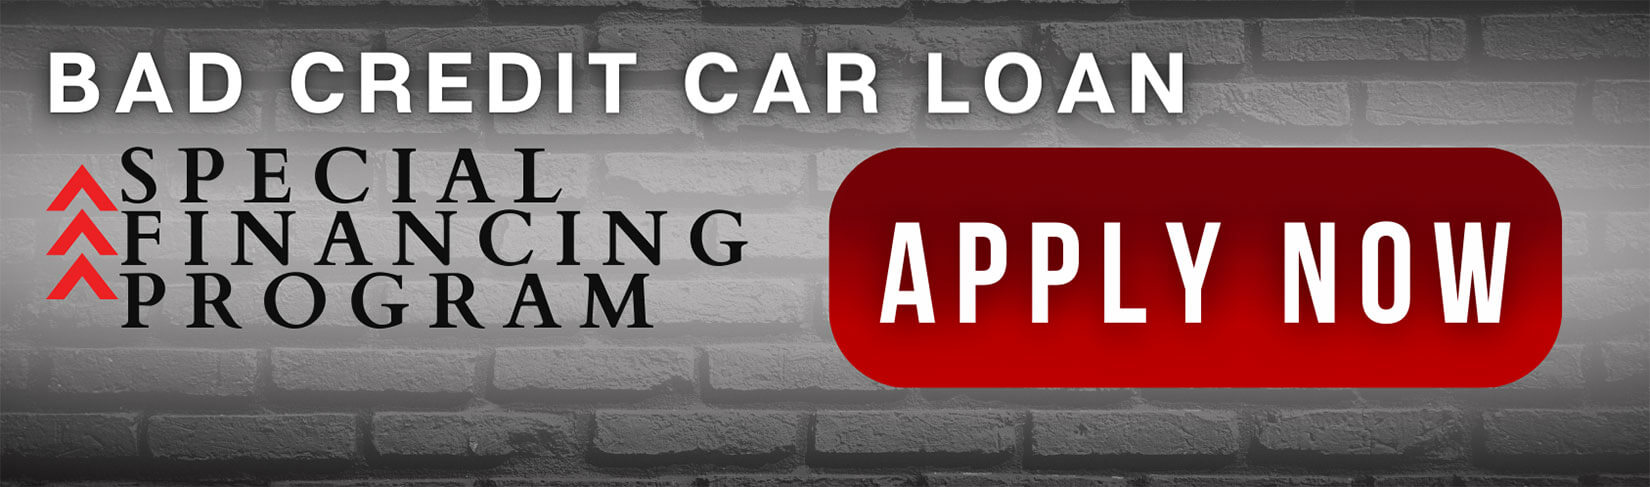 Bad credit car loan, special financing program, click here to apply now.